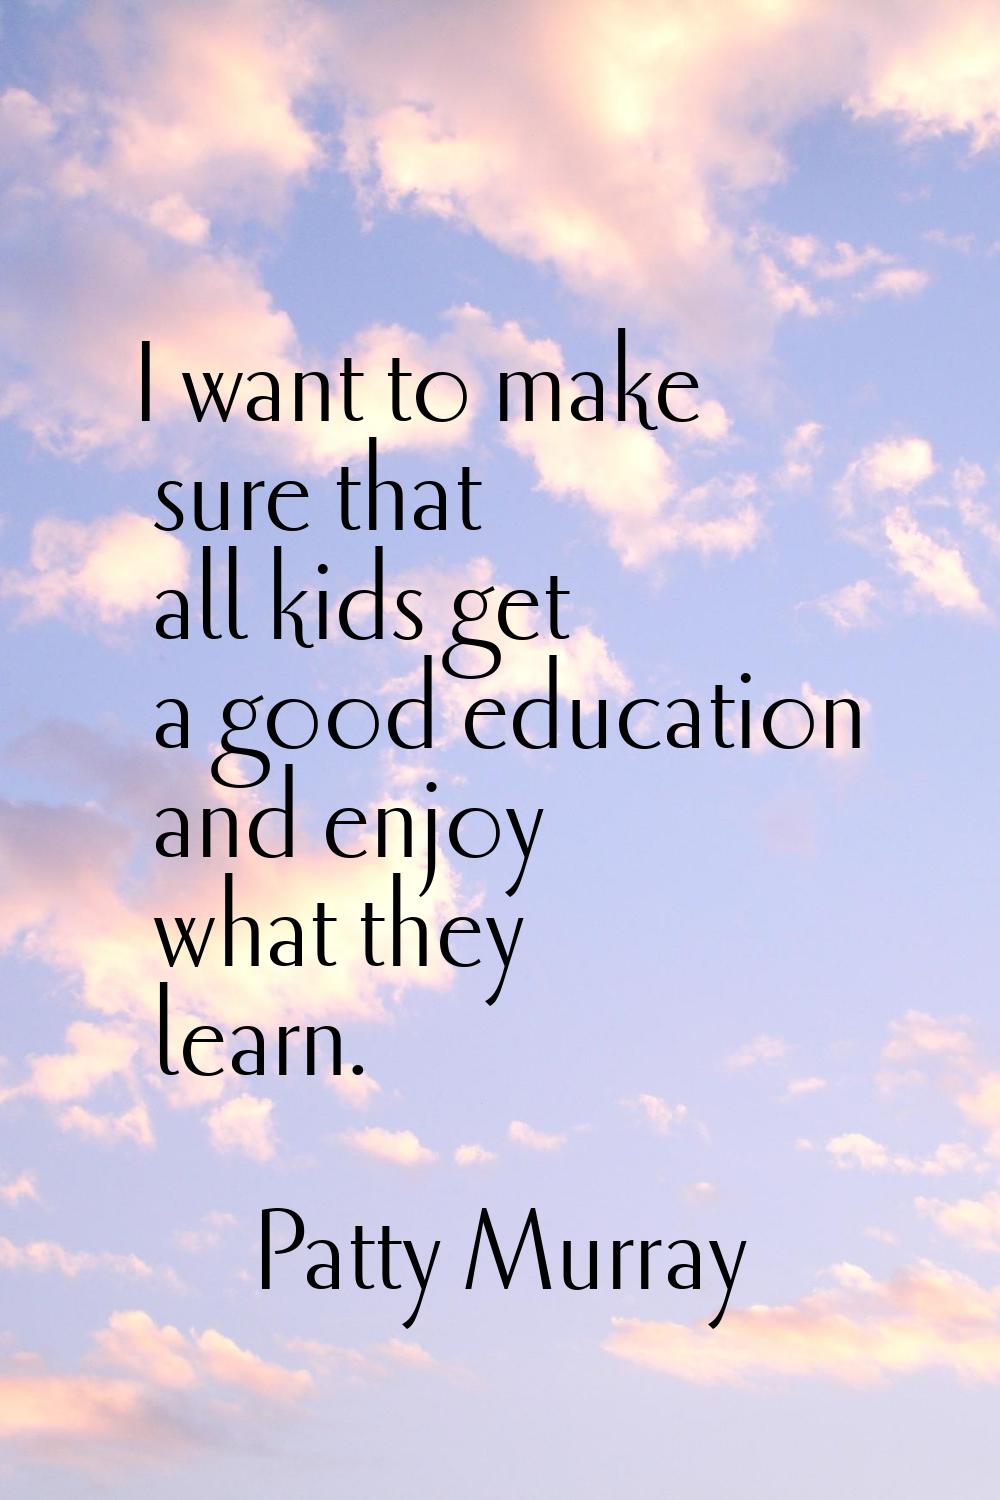 I want to make sure that all kids get a good education and enjoy what they learn.